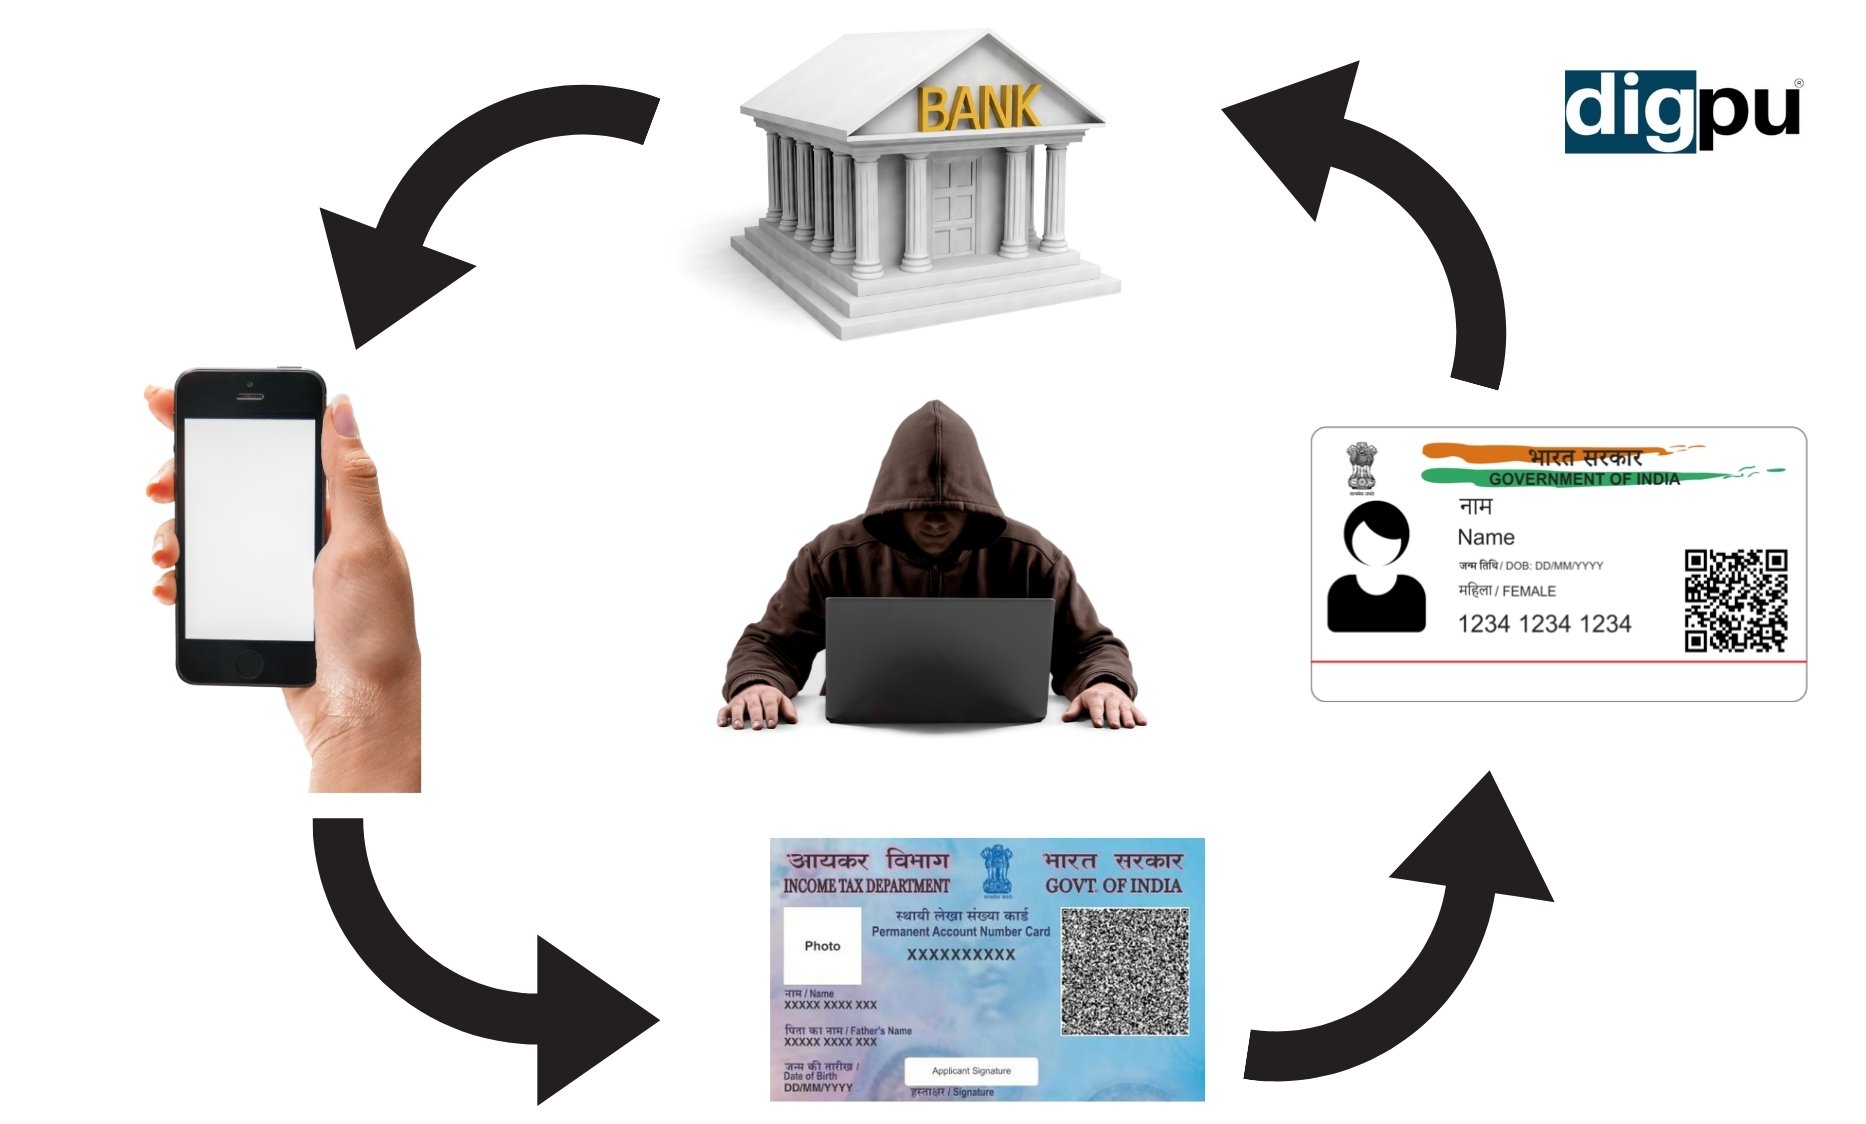 Linking with Aadhar & Pan Card with Bank